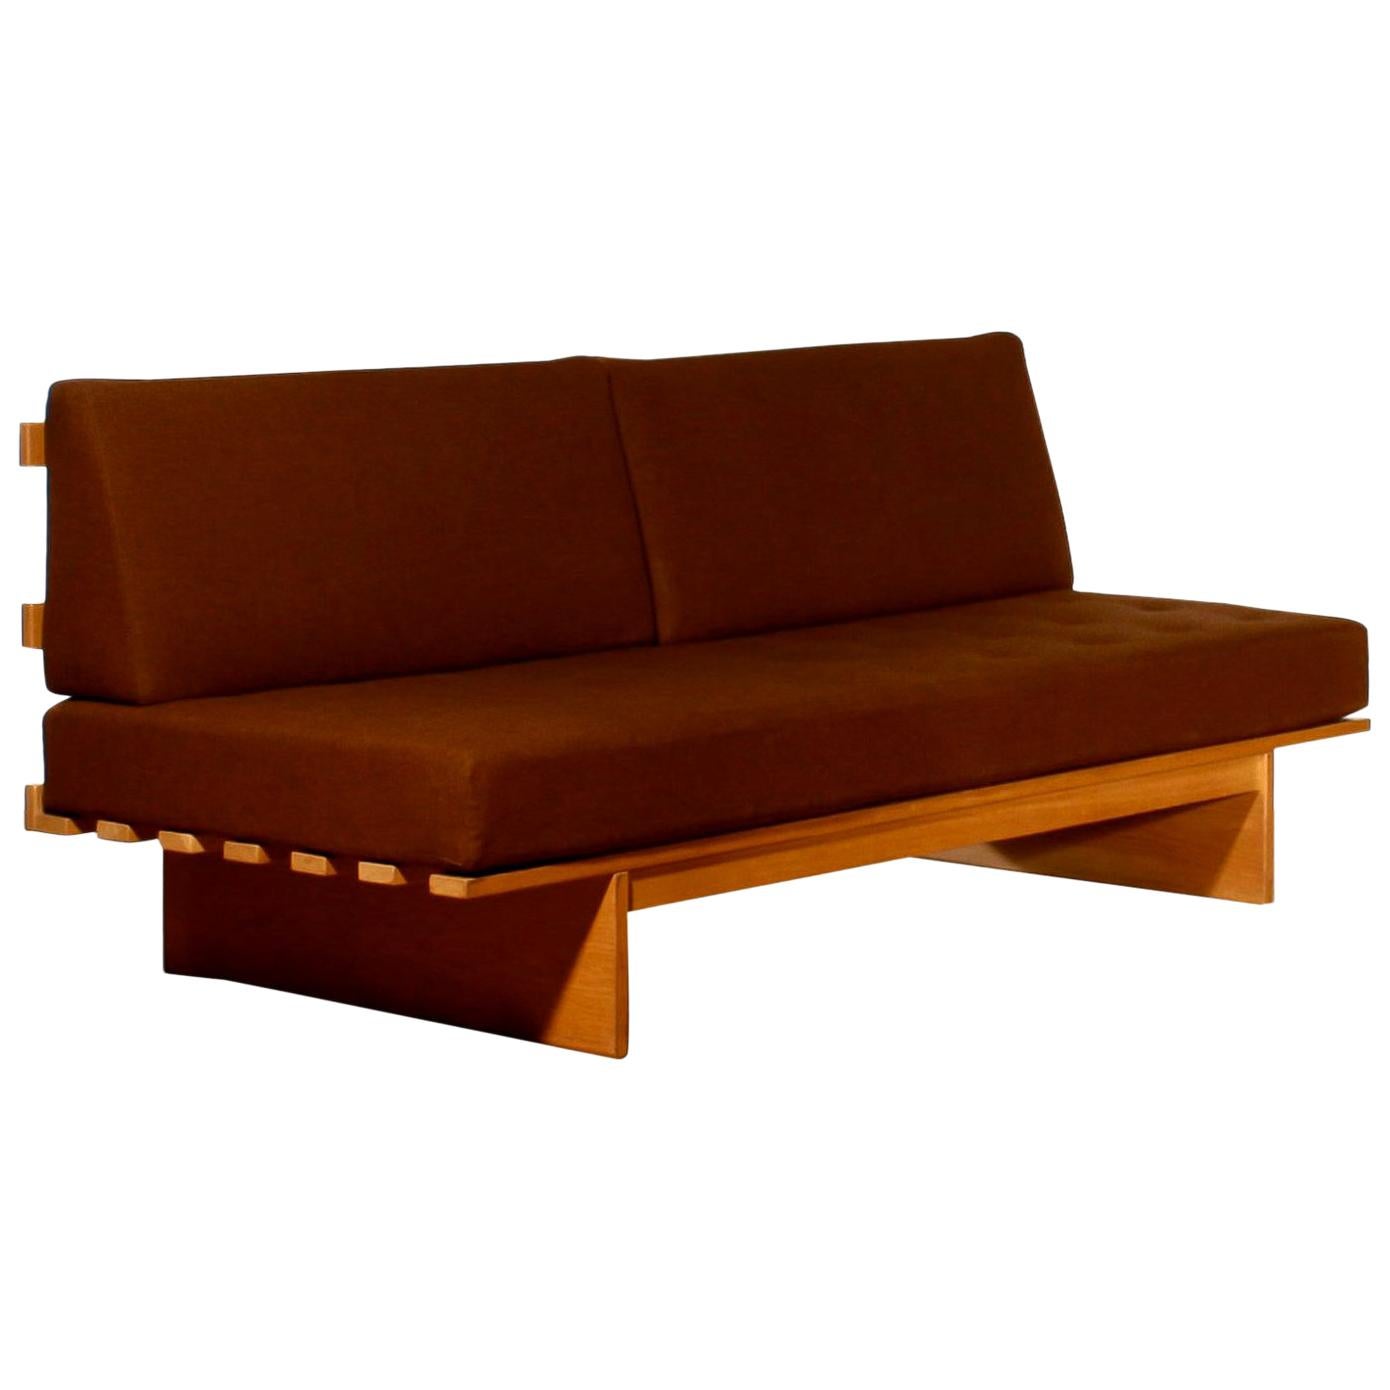 In absolute top condition sleeper or daybed in oak and dark brown wool.
The seat cushion / mattress are excellent and built with high-quality pocket springs
Overall impression is good.
Designed by Bra Bohag.
Manufactured by DUX.
Design period